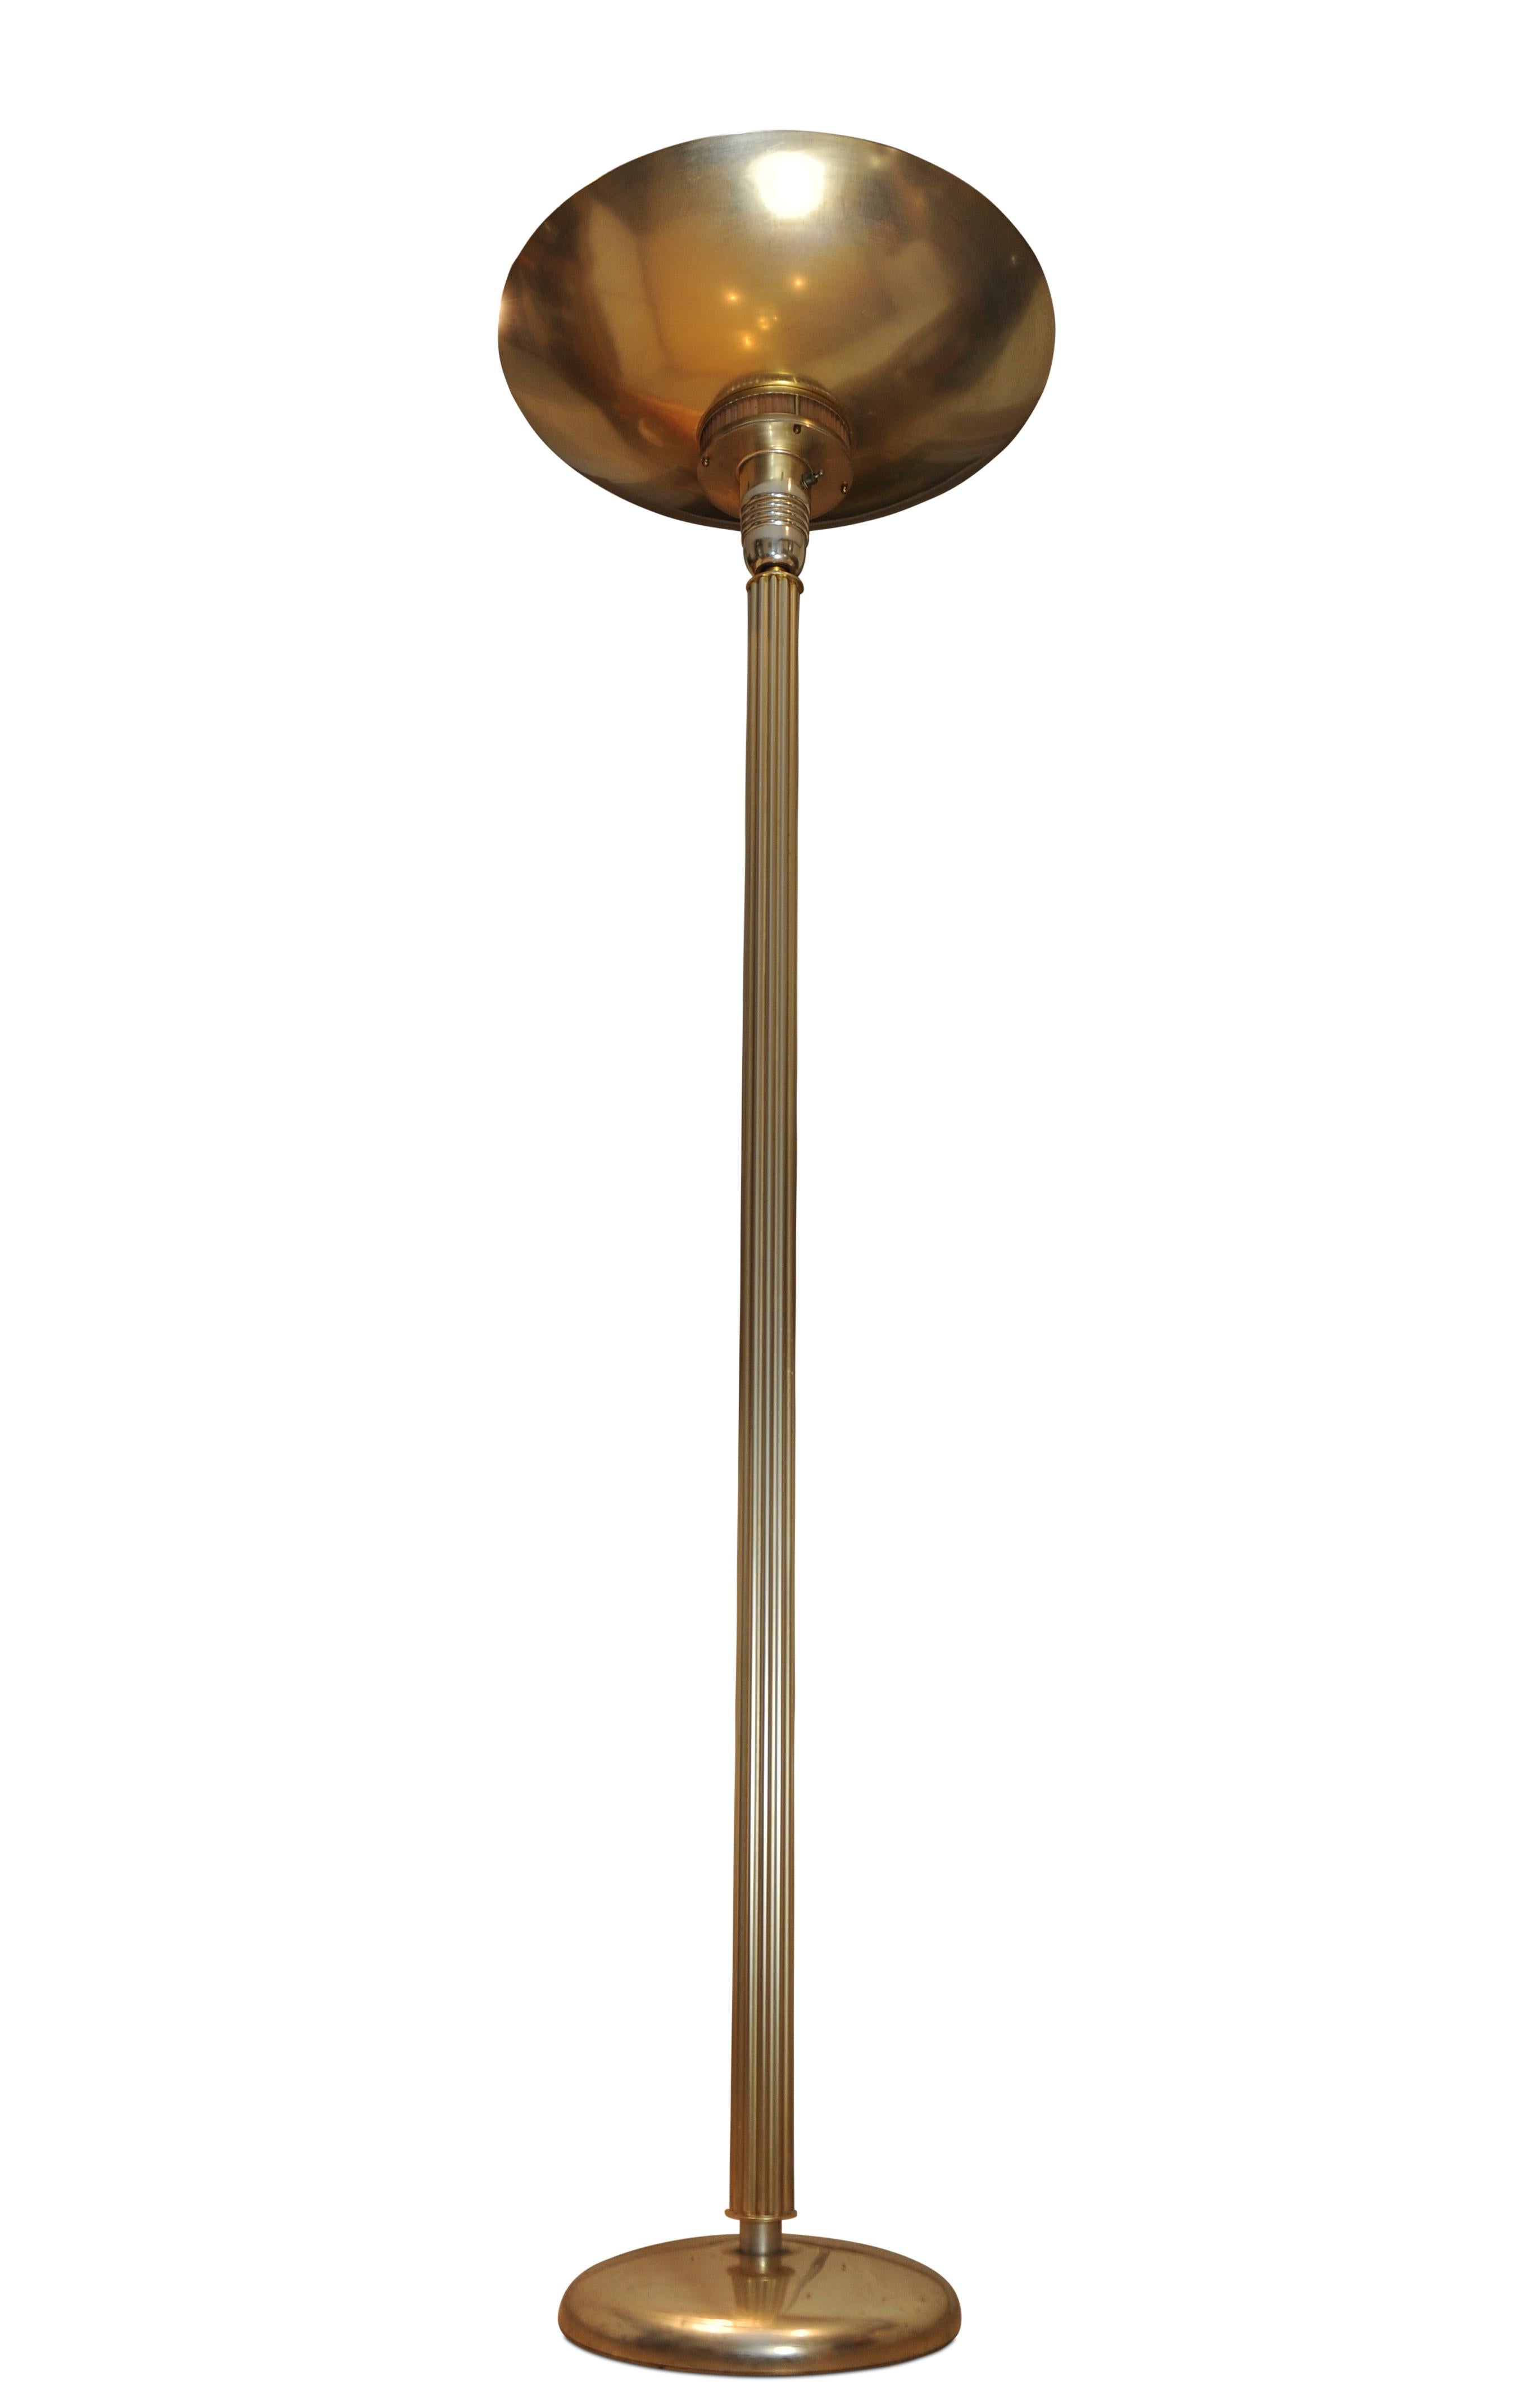 An Original 1920's Statuesque Art Deco Aluminium Floor Lamp with A Fluted Columnar Centre & Large Dished Uplighter.

Featuring An Attractive Amber Glass Band That Illuminates When Lamp is Switched On.

Retailed by Heals of London

Metal toggle